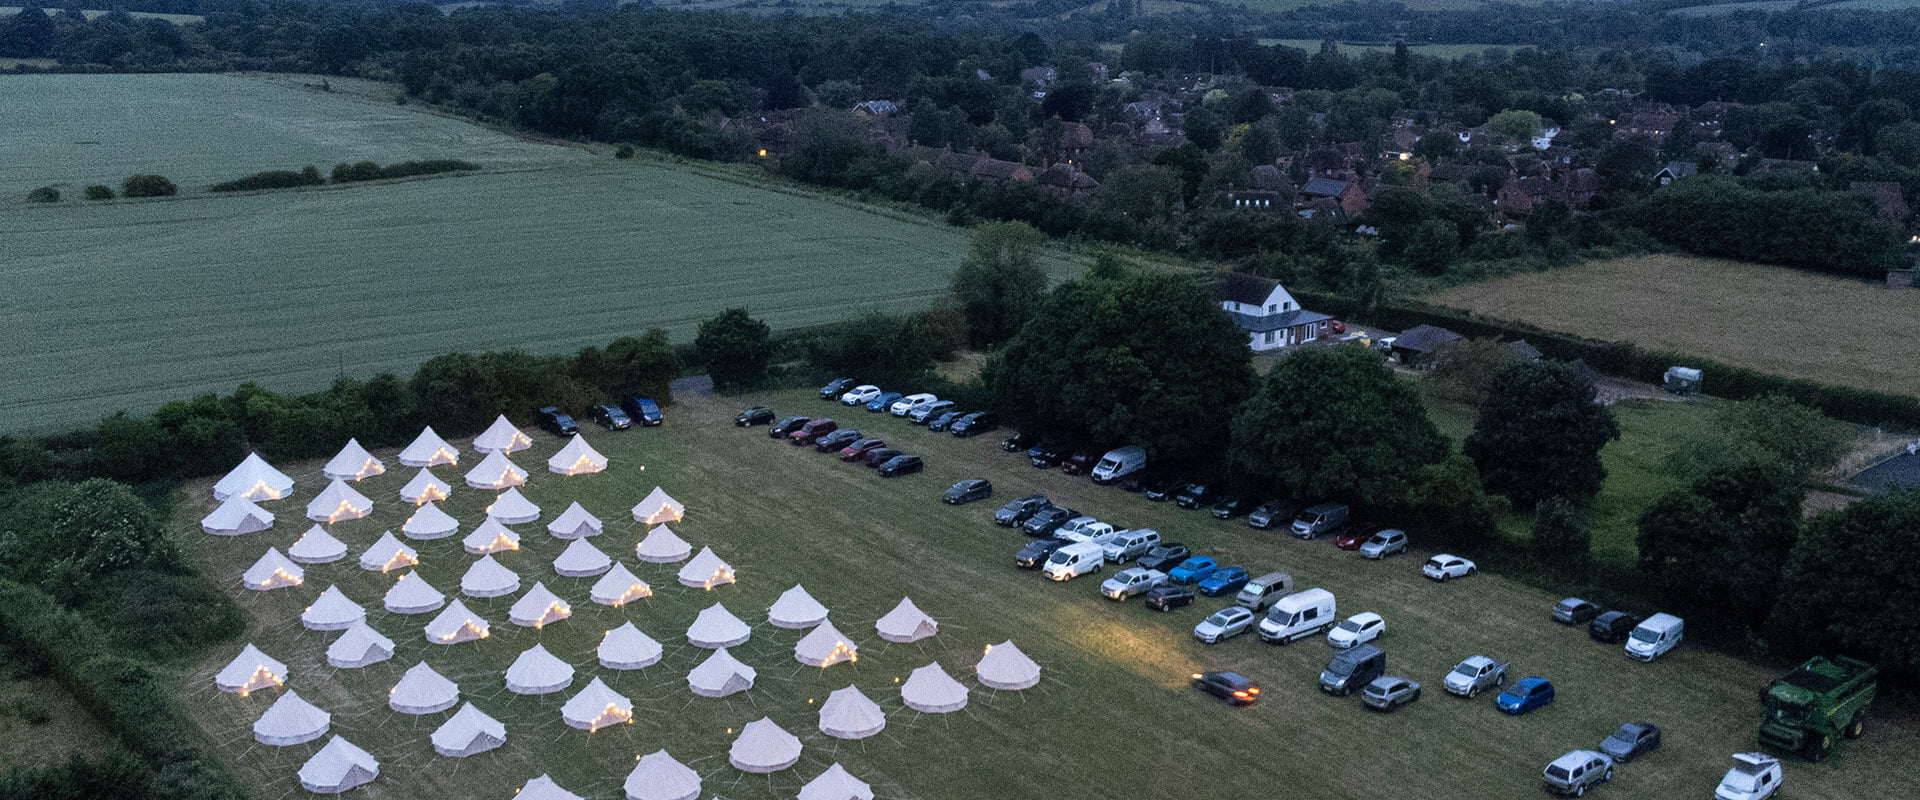 Bell Tent Hire in Dorset, Hampshire, Wiltshire and the UK